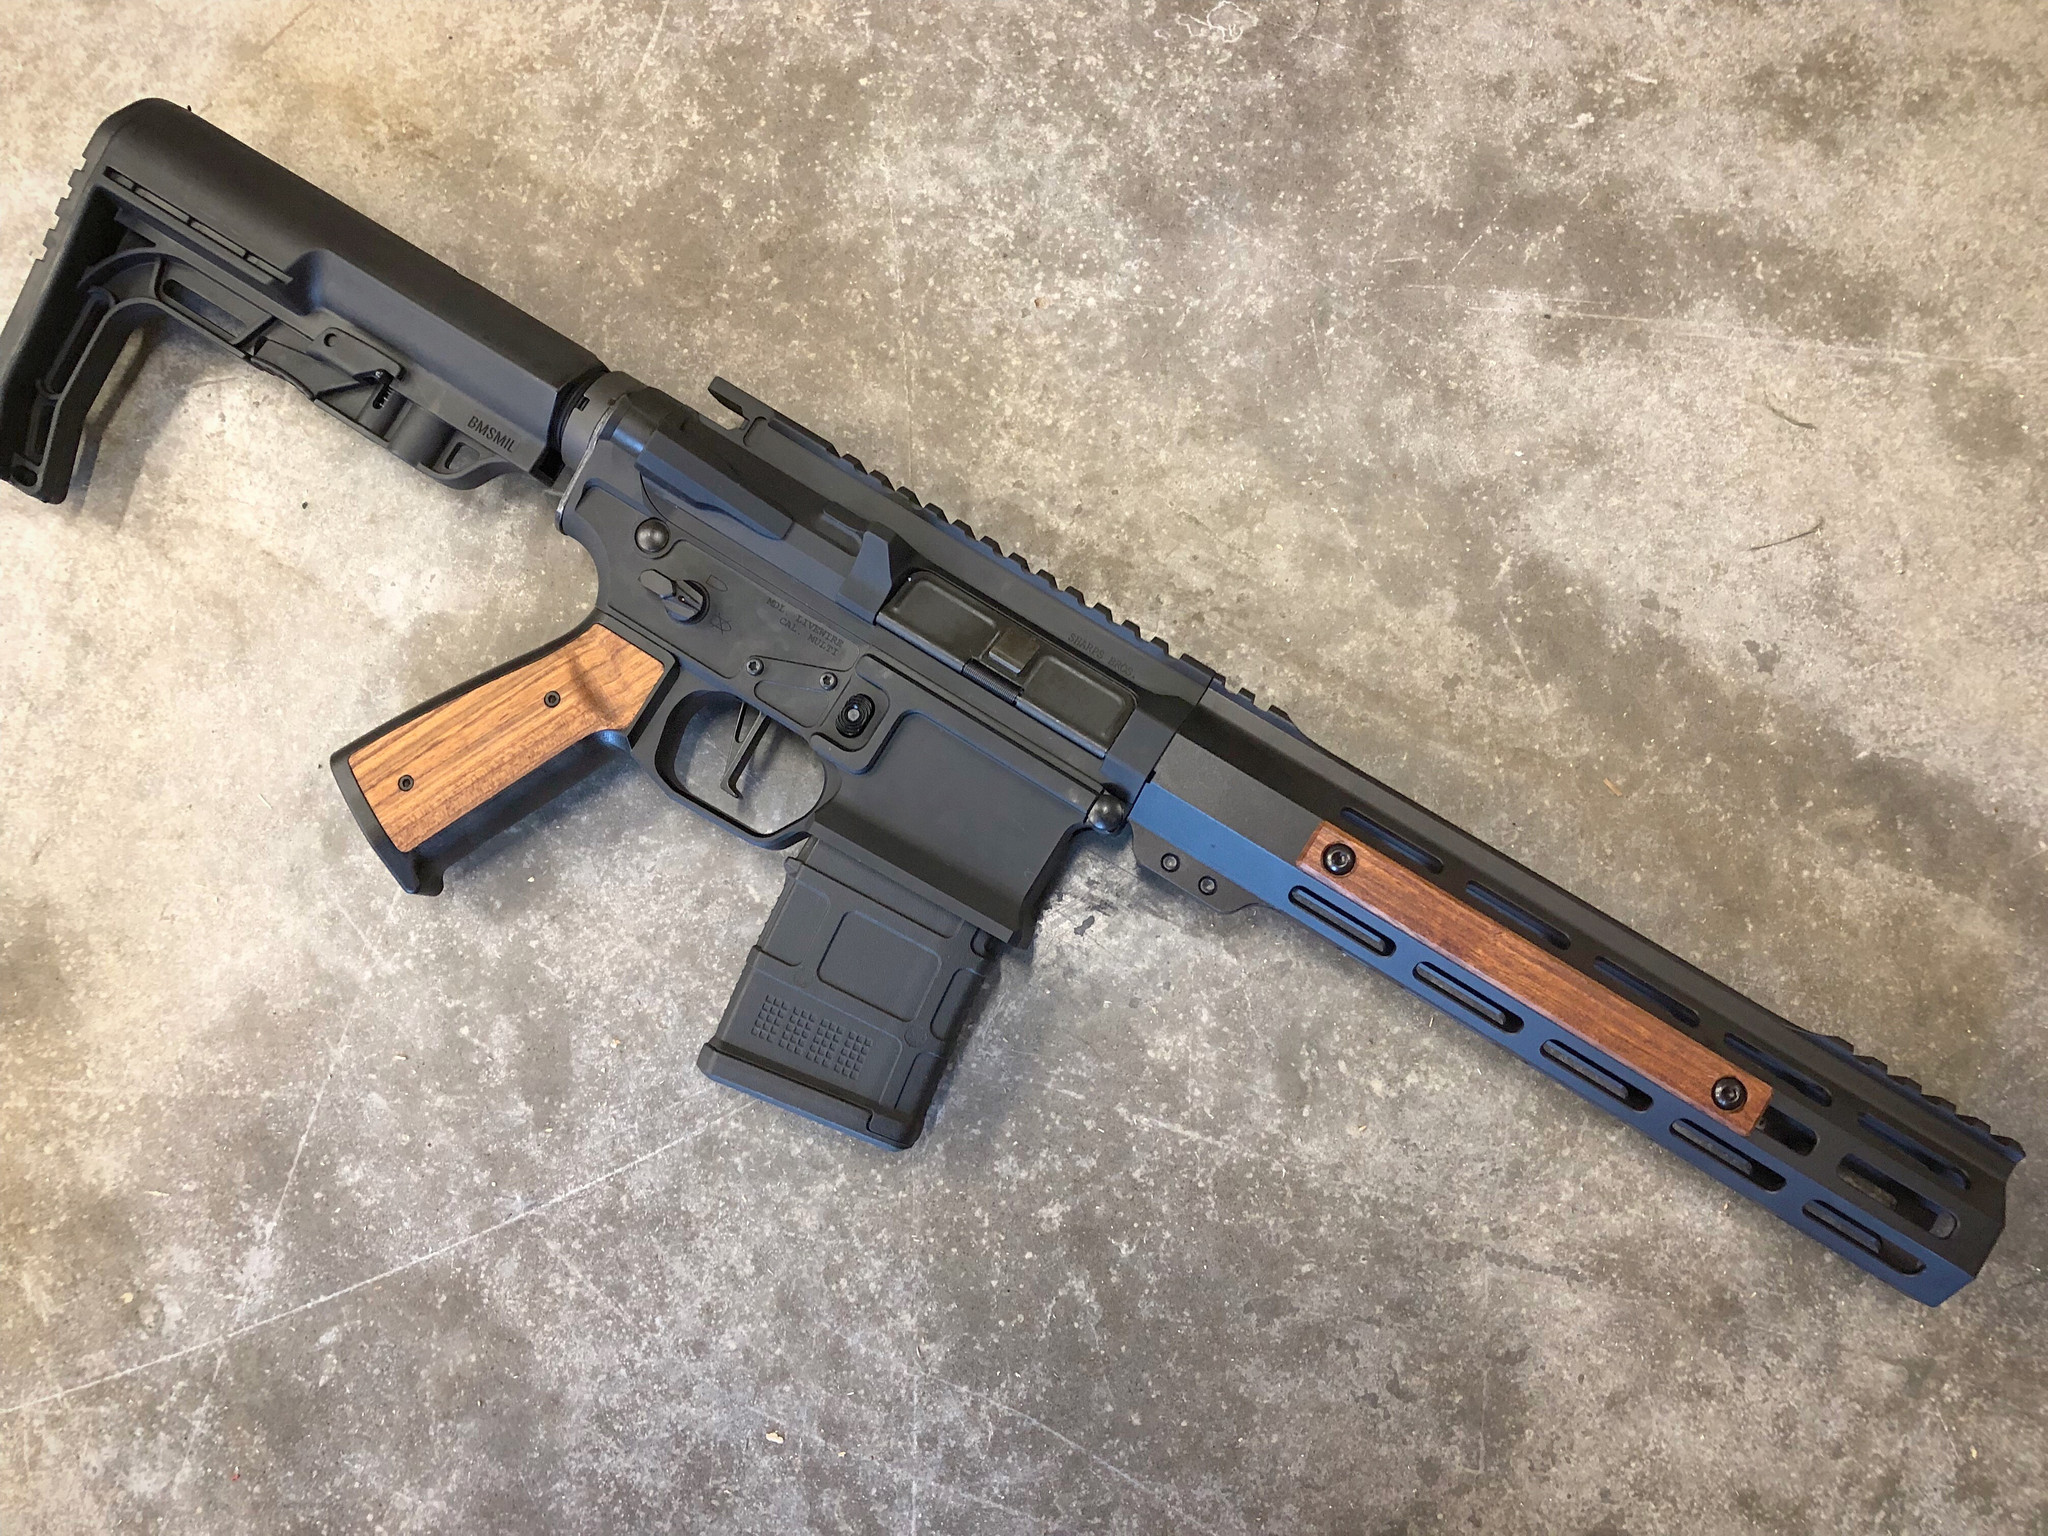 Achieve Aesthetic Overmatch with Black Wood USA's Wooden AR-15 Furnitu...